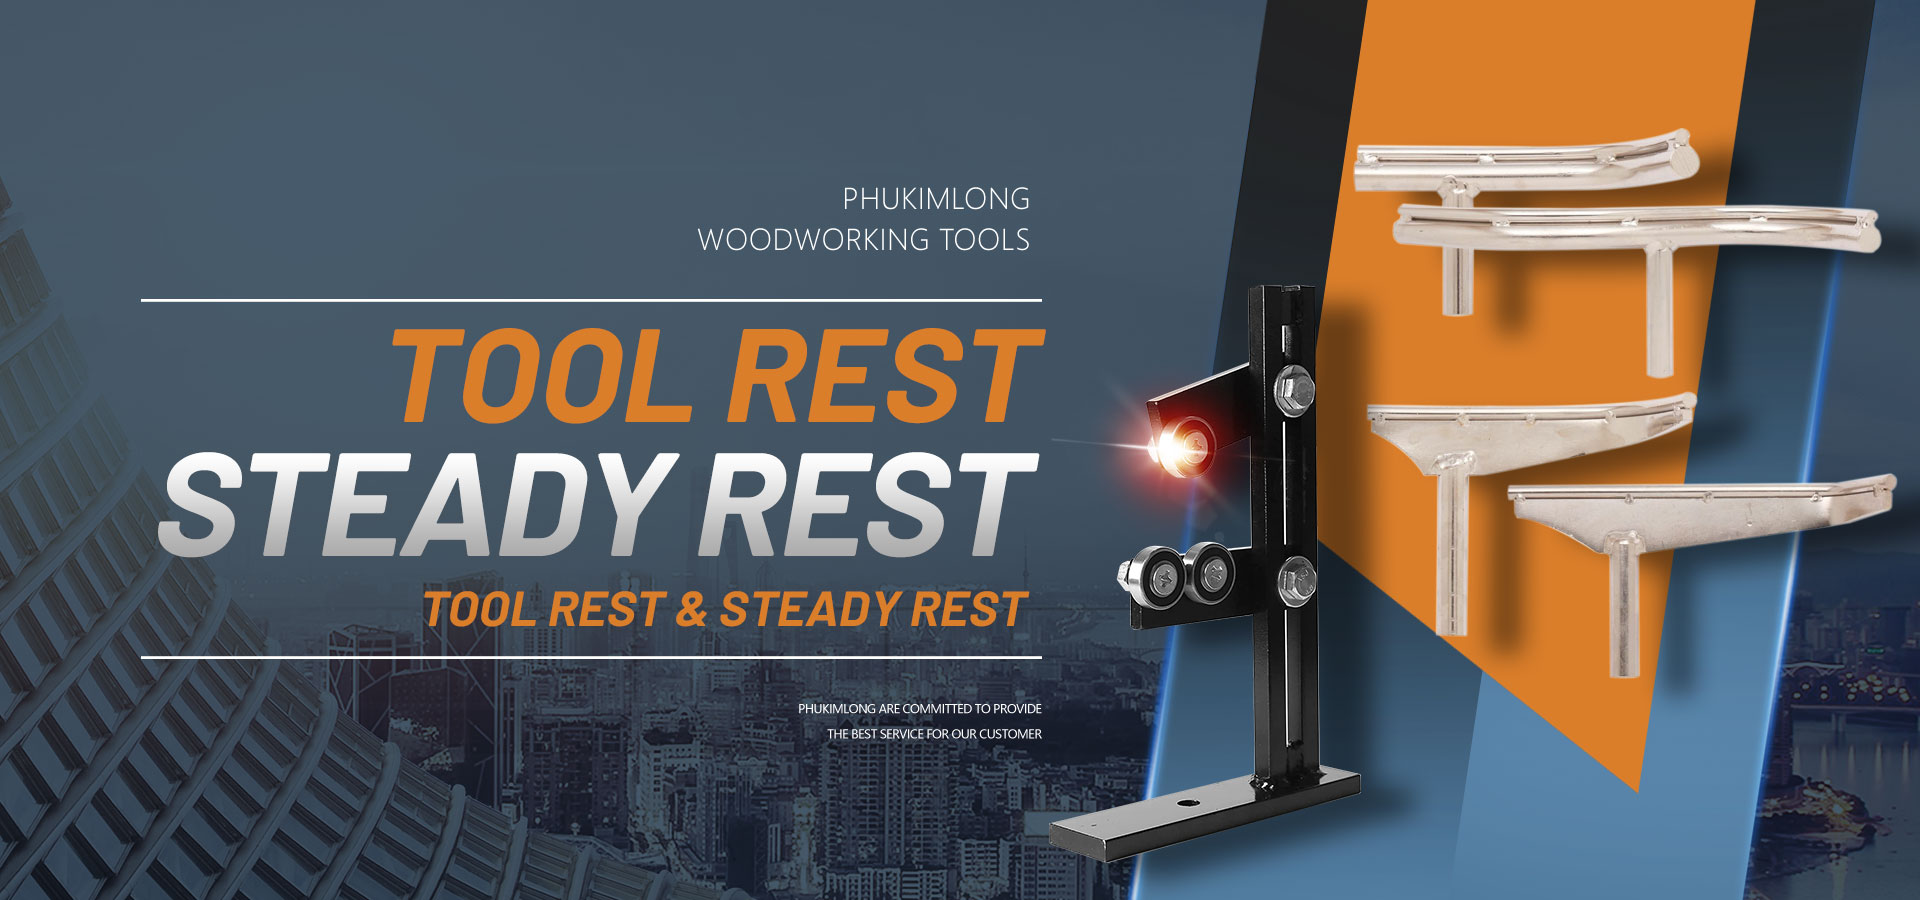 Tool Rest & Steady Rest